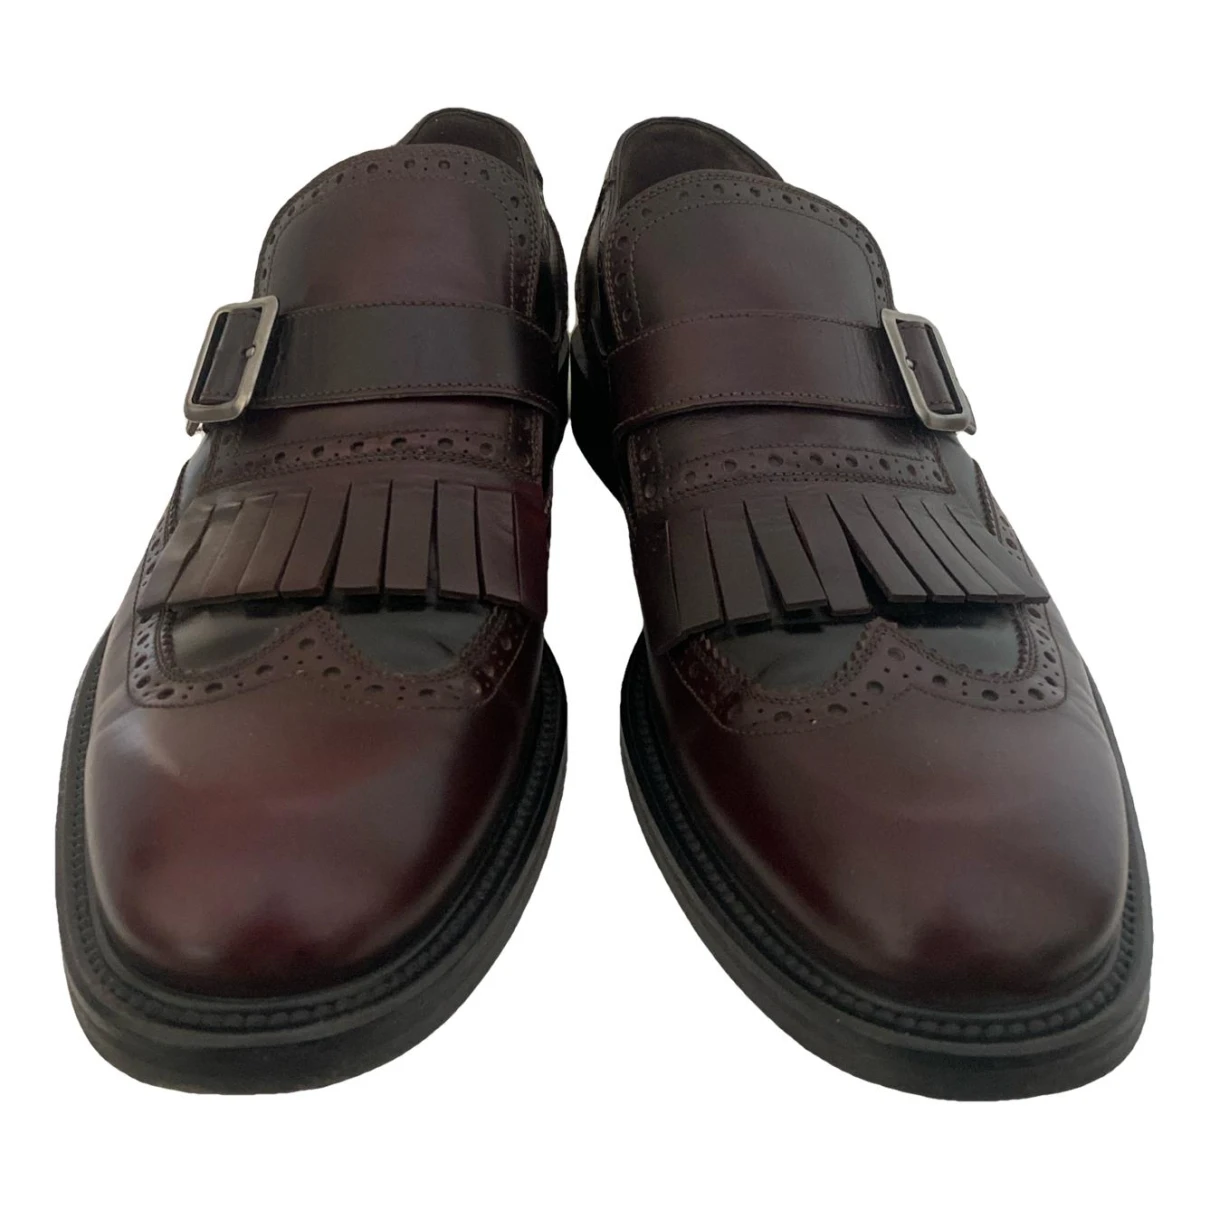 Pre-owned Ferragamo Leather Lace Ups In Burgundy